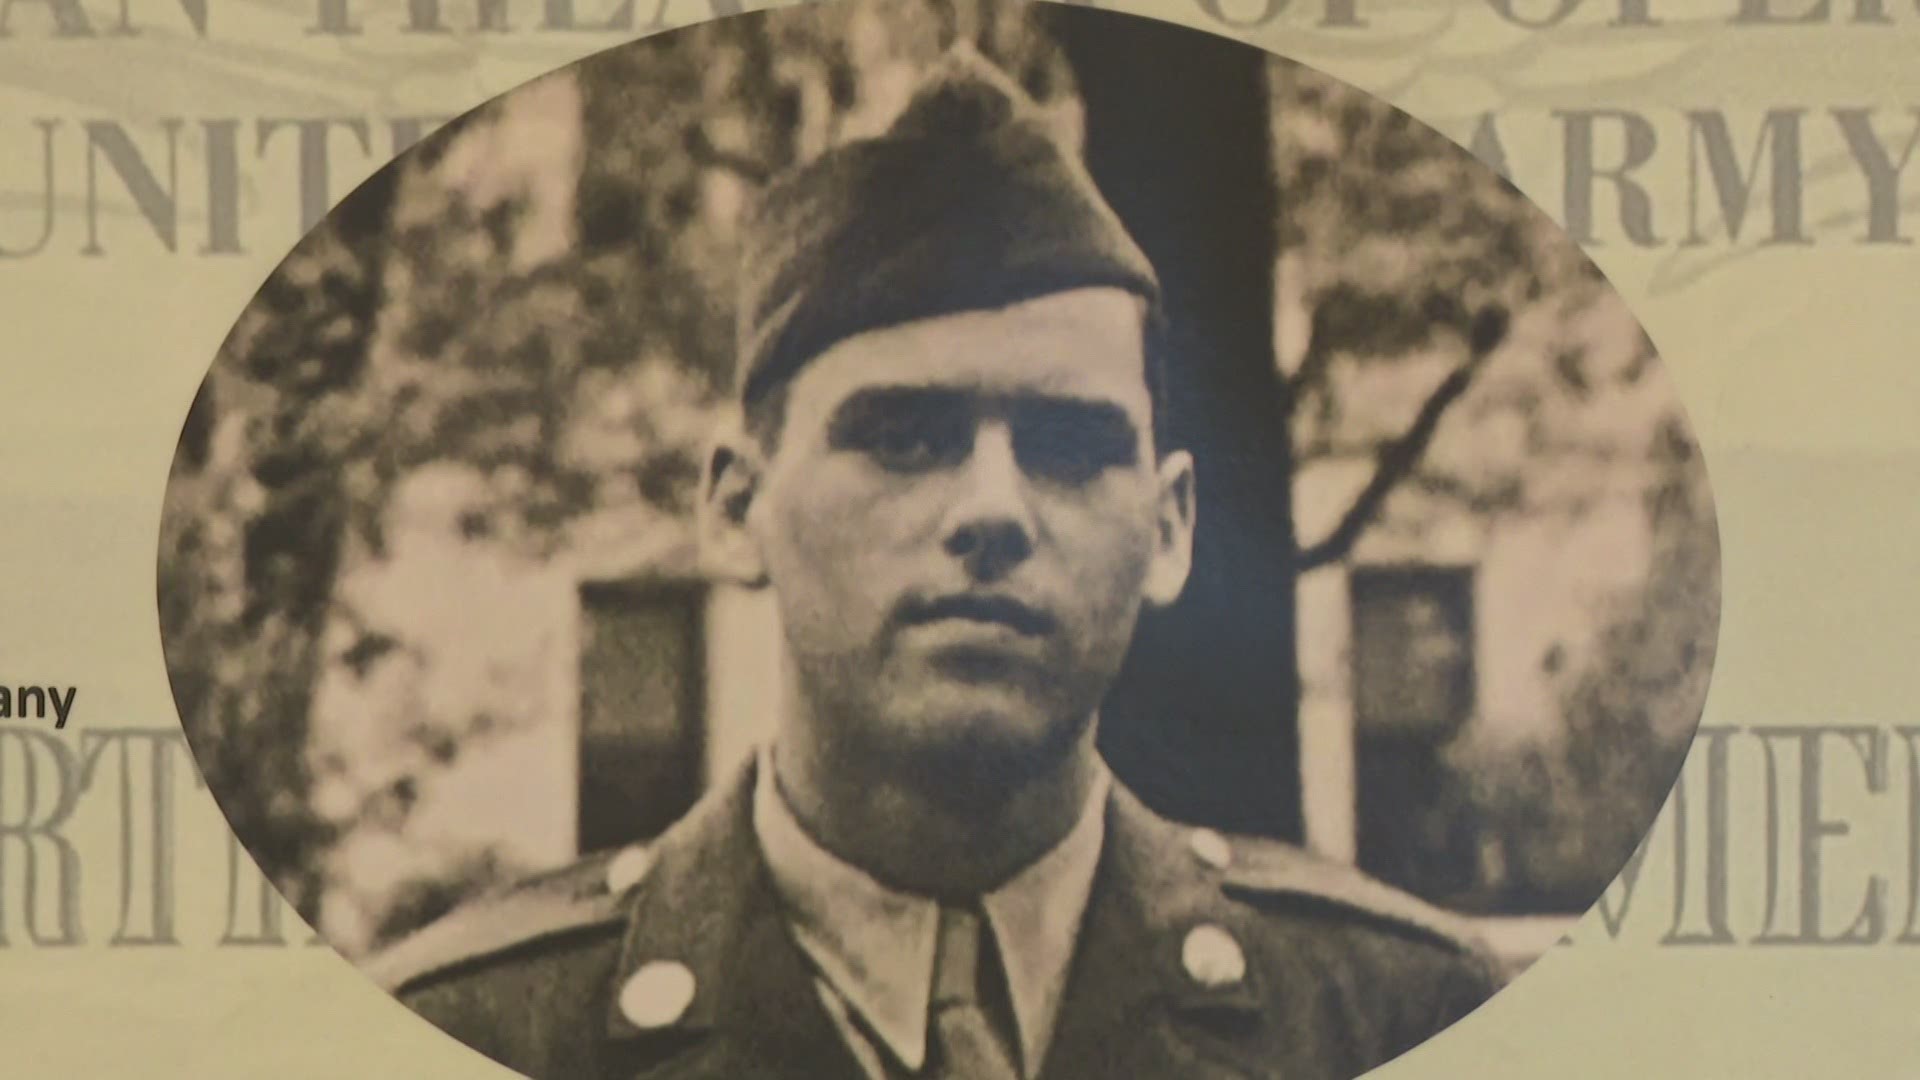 On Dec. 16, 1944, U.S. Army PFC Robert H. Shields fought in The Battle of the Bulge. At 95, he's finally recognized for his heroism with the Bronze Star Medal.